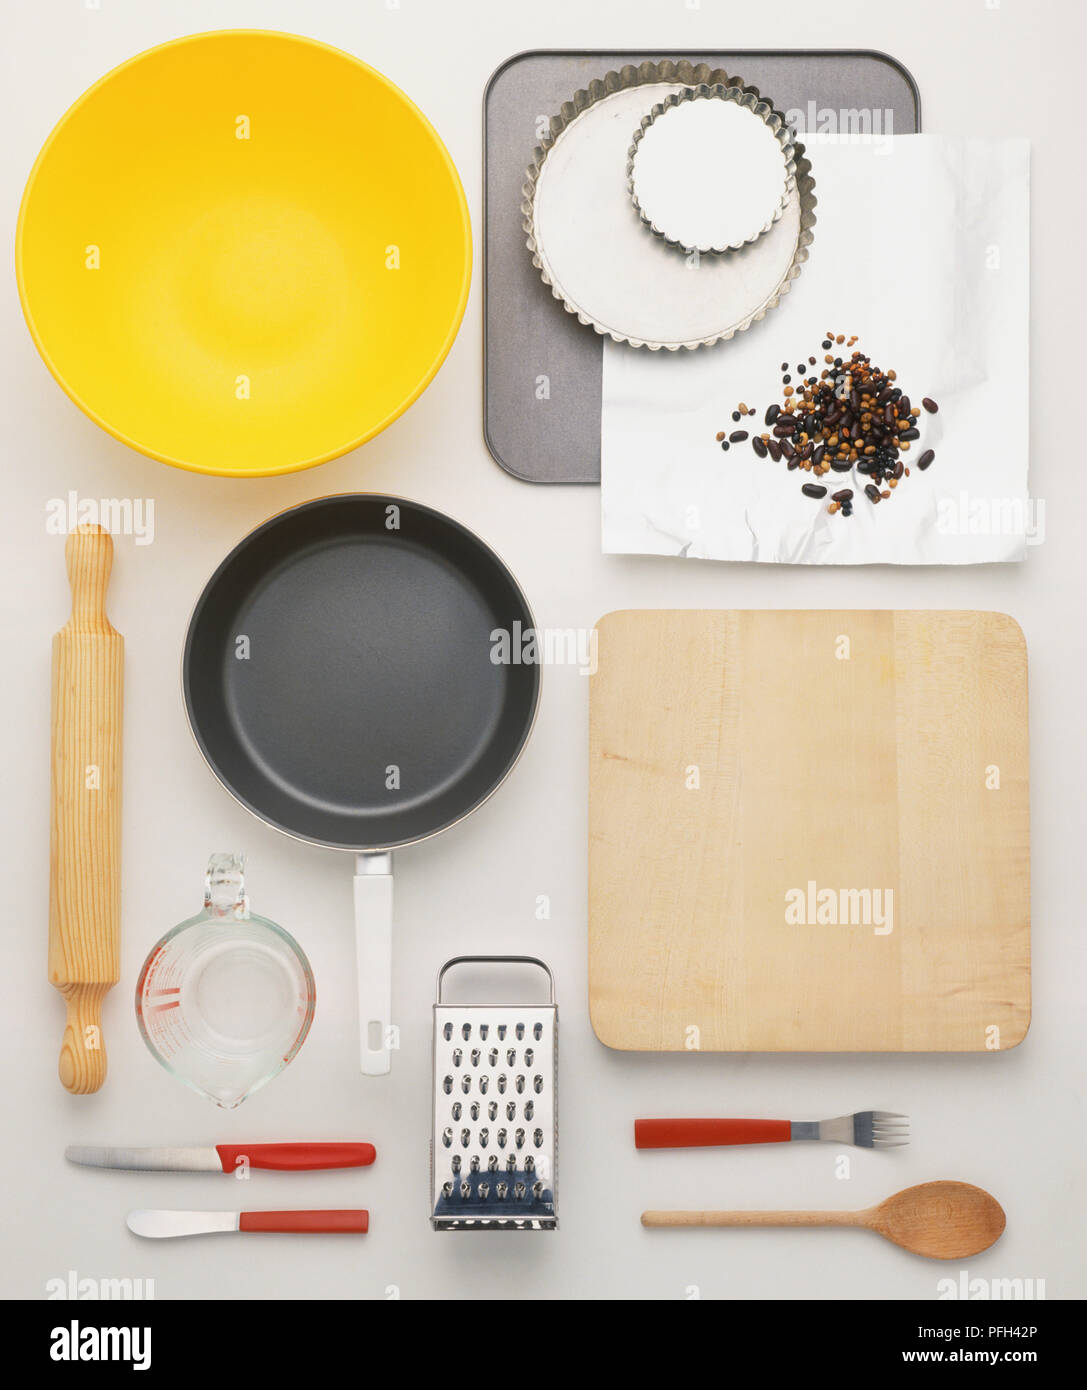 Array of baking and cooking utensils, including rolling pin, baking tins, bowls, frying pan, wooden cutting board, metal grater, measuring jug, knives and foil Stock Photo